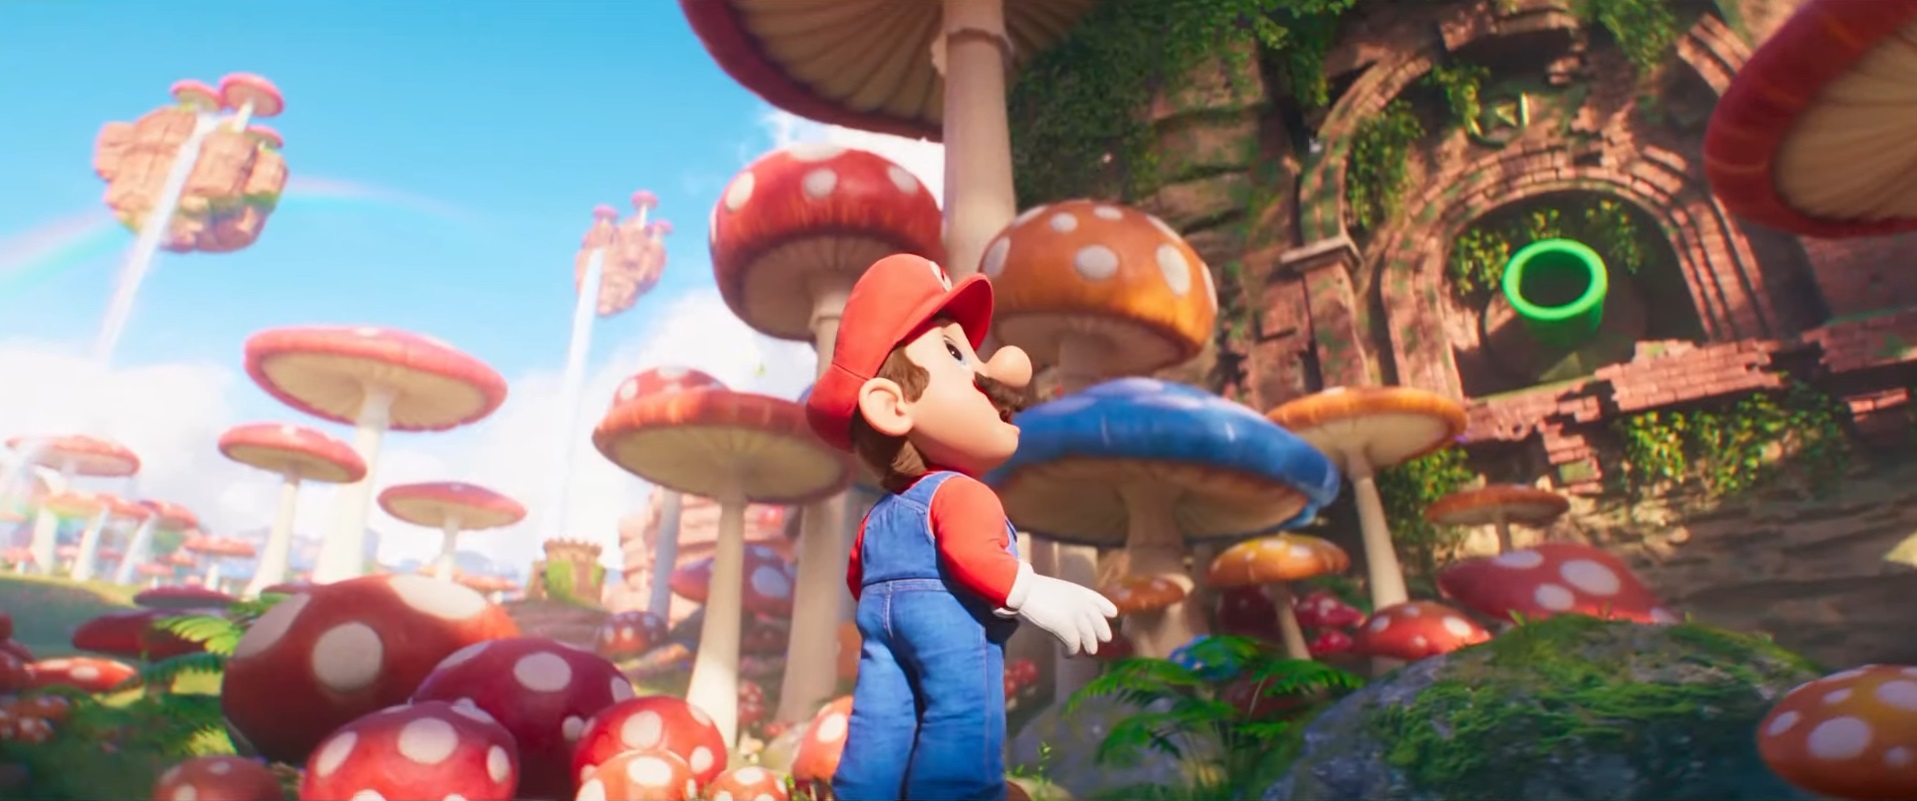 The Super Mario Bros. Movie'; The First & Poster For The Illumination Film Are Here!